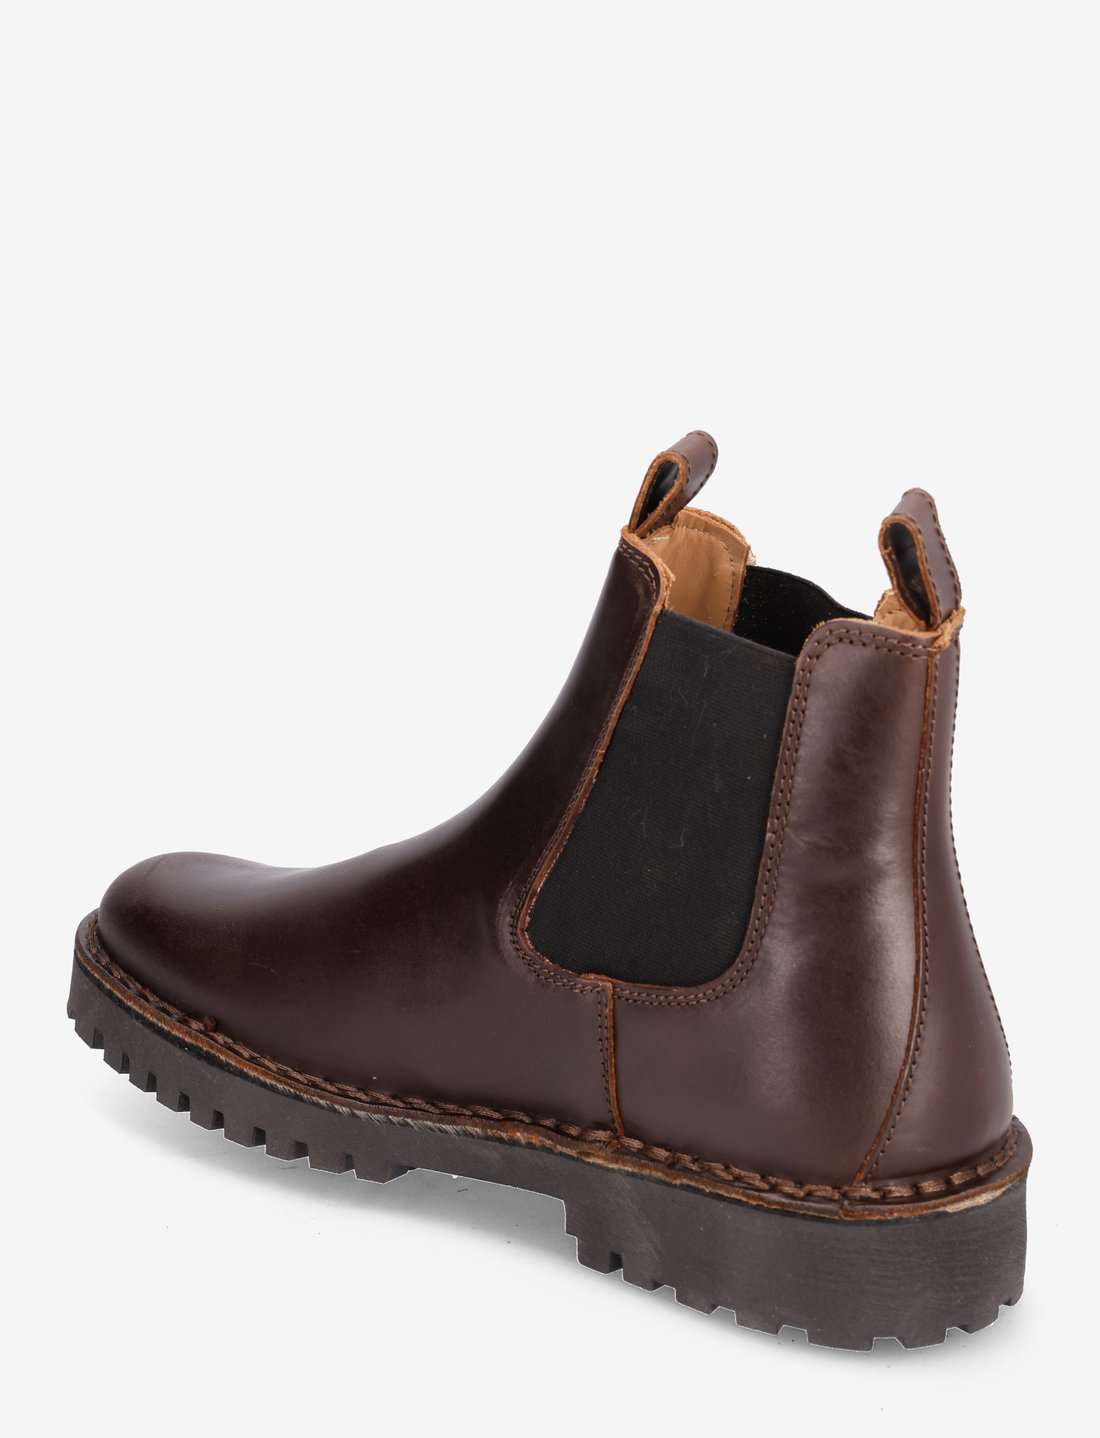 skab Have en picnic Forgænger Selected Homme Slhricky Leather Chelsea Boot B - Chelsea boots - Boozt.com